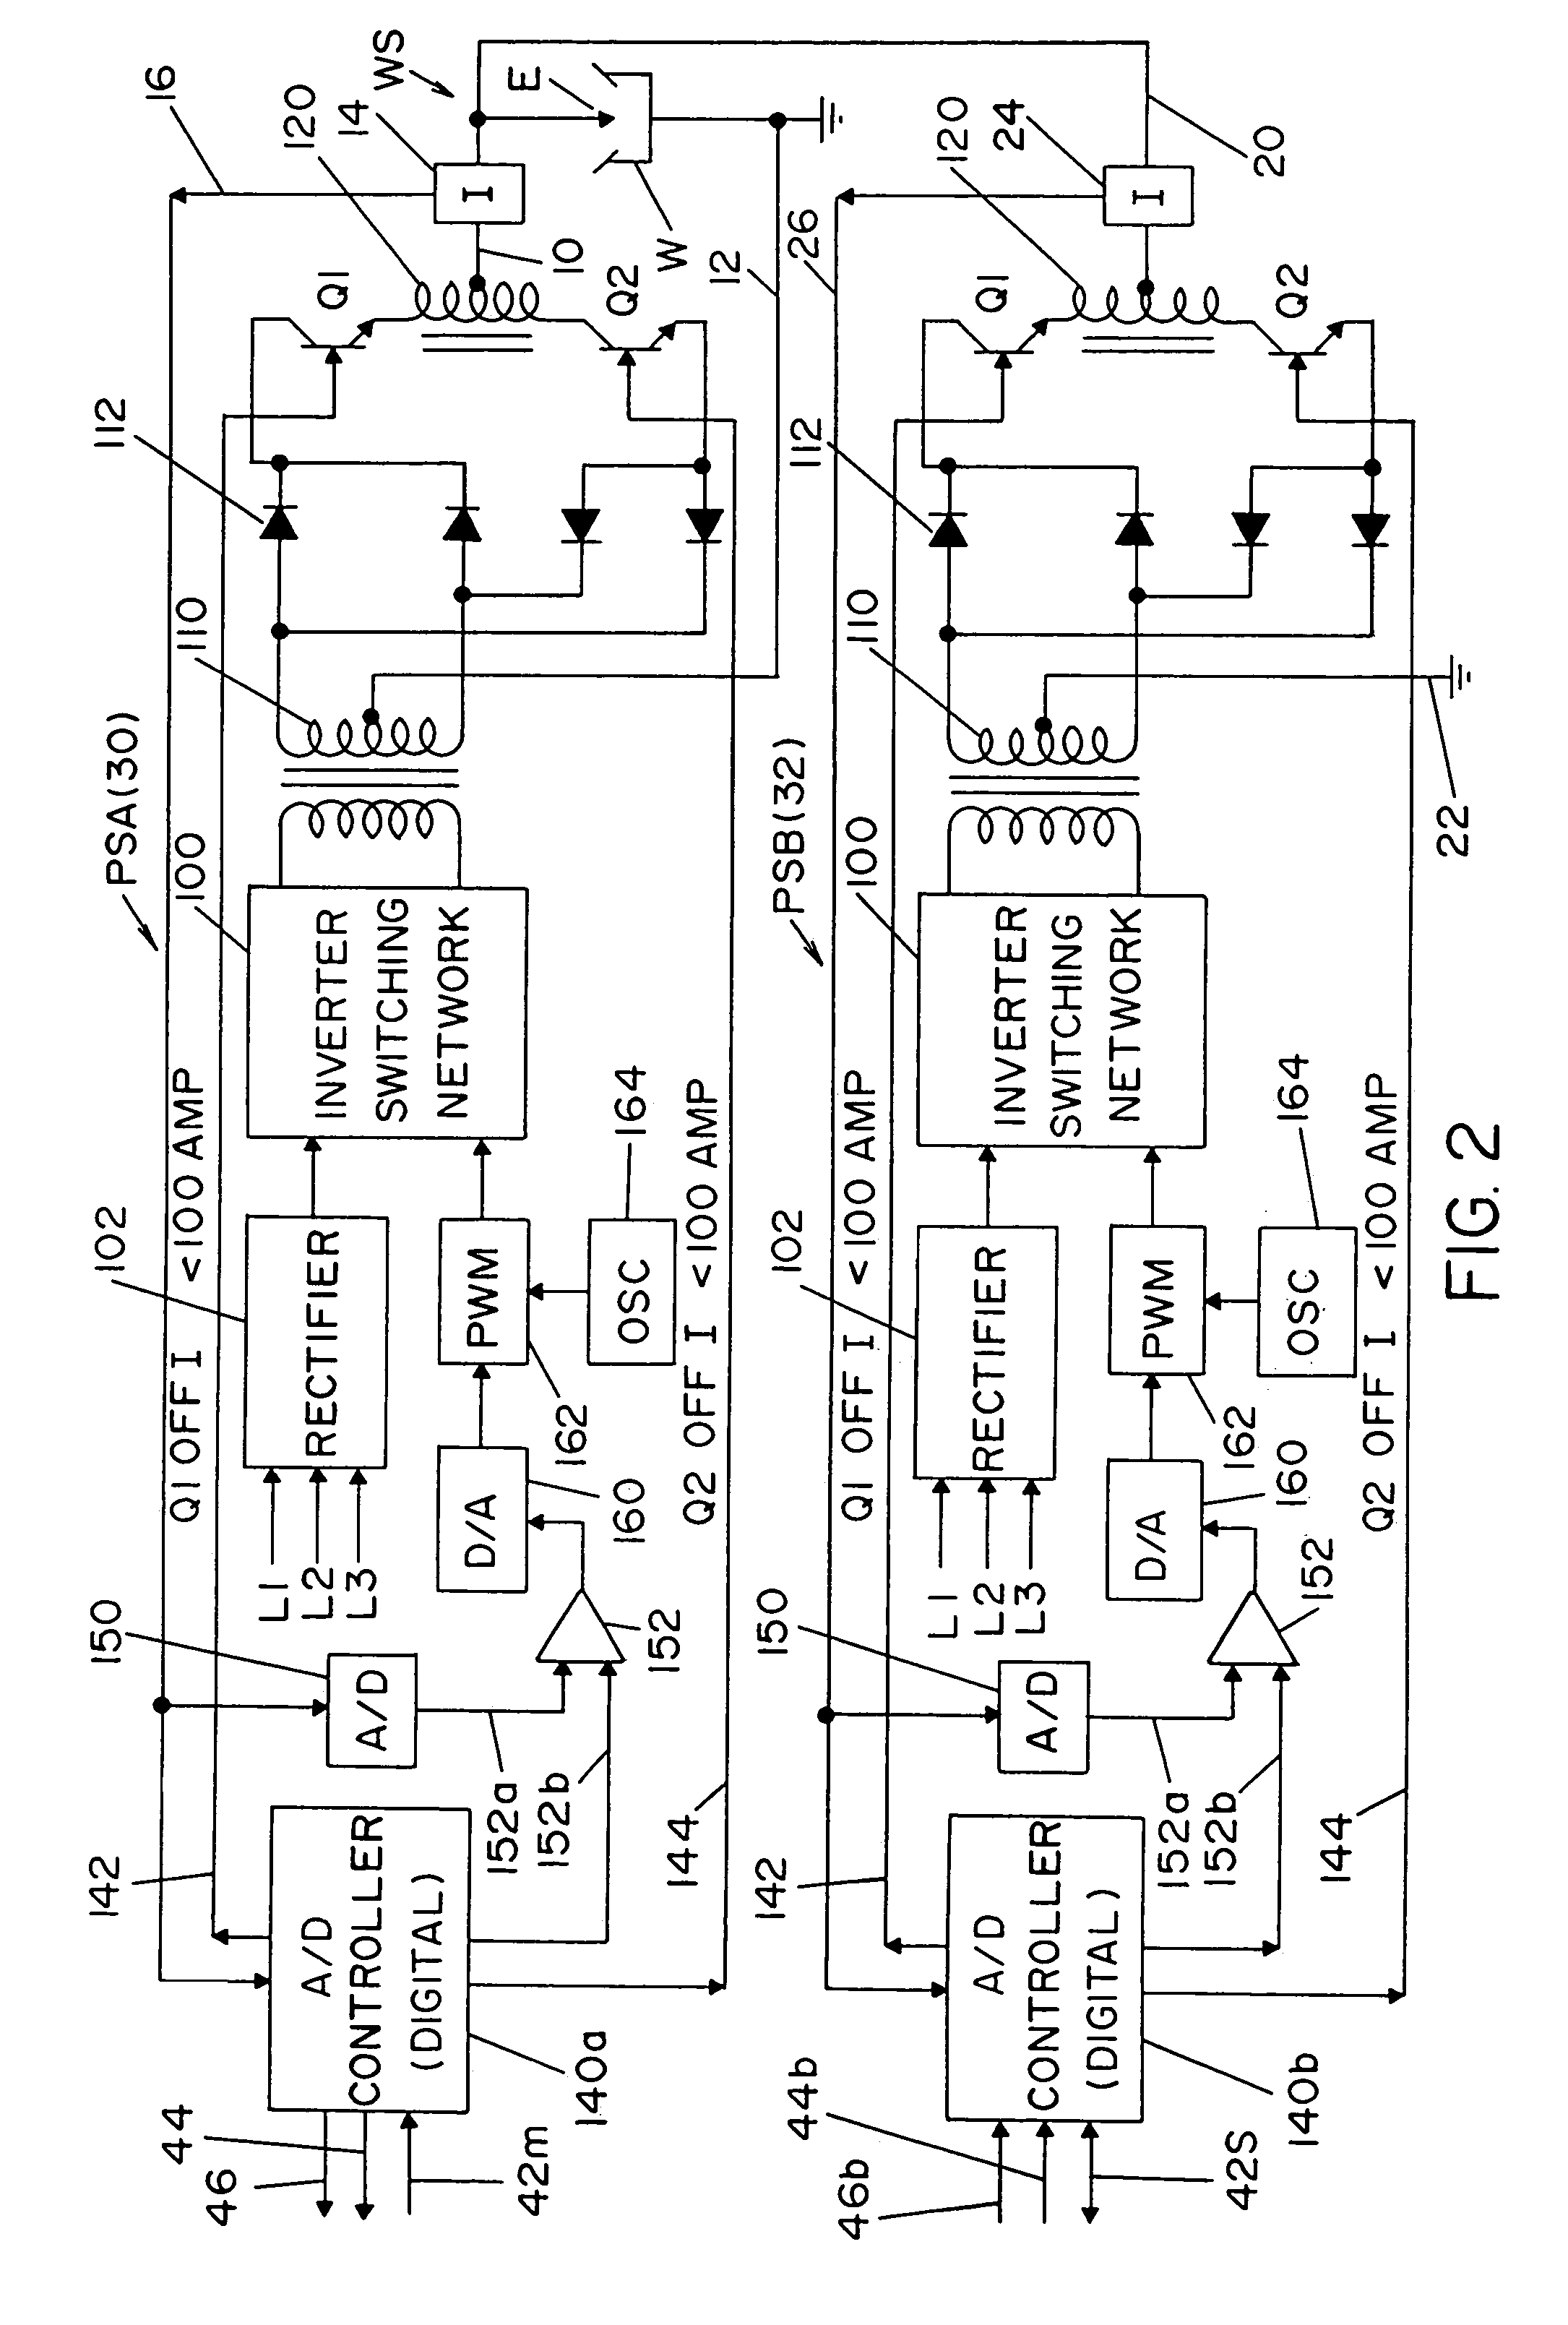 Electric arc welder system with waveform profile control